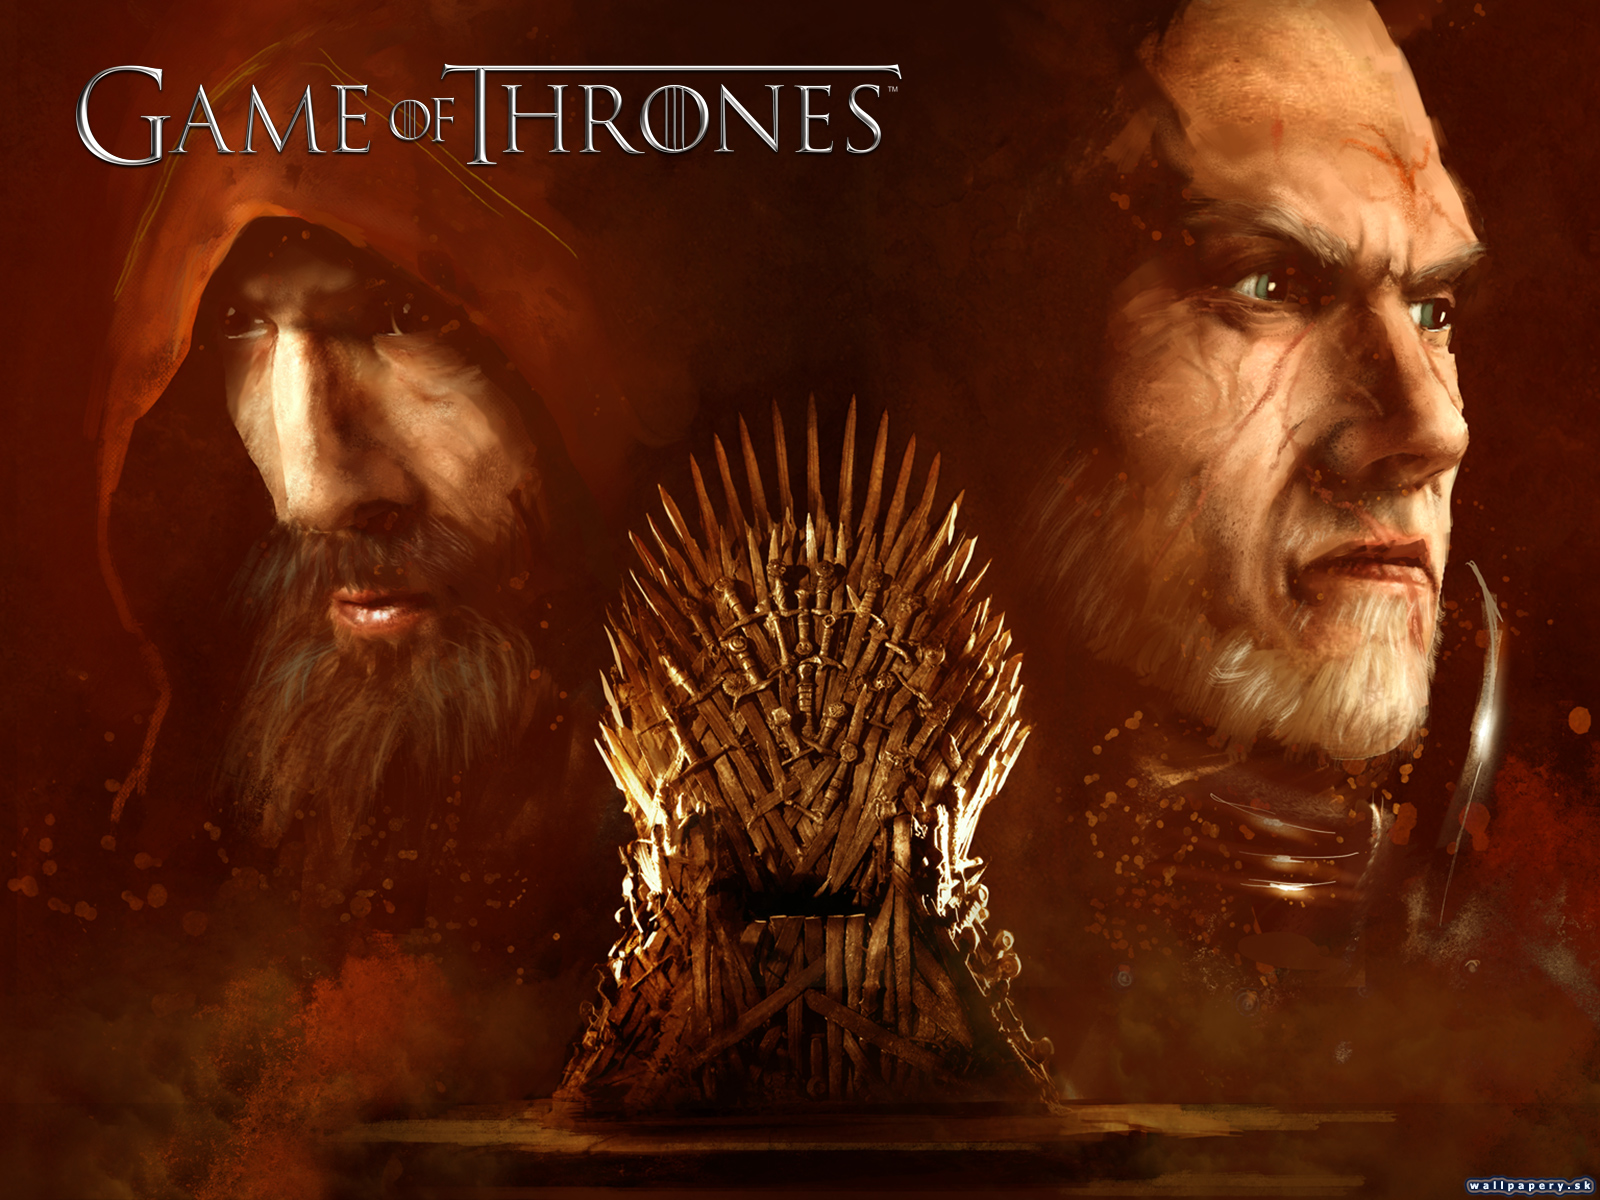 Game of Thrones - wallpaper 1